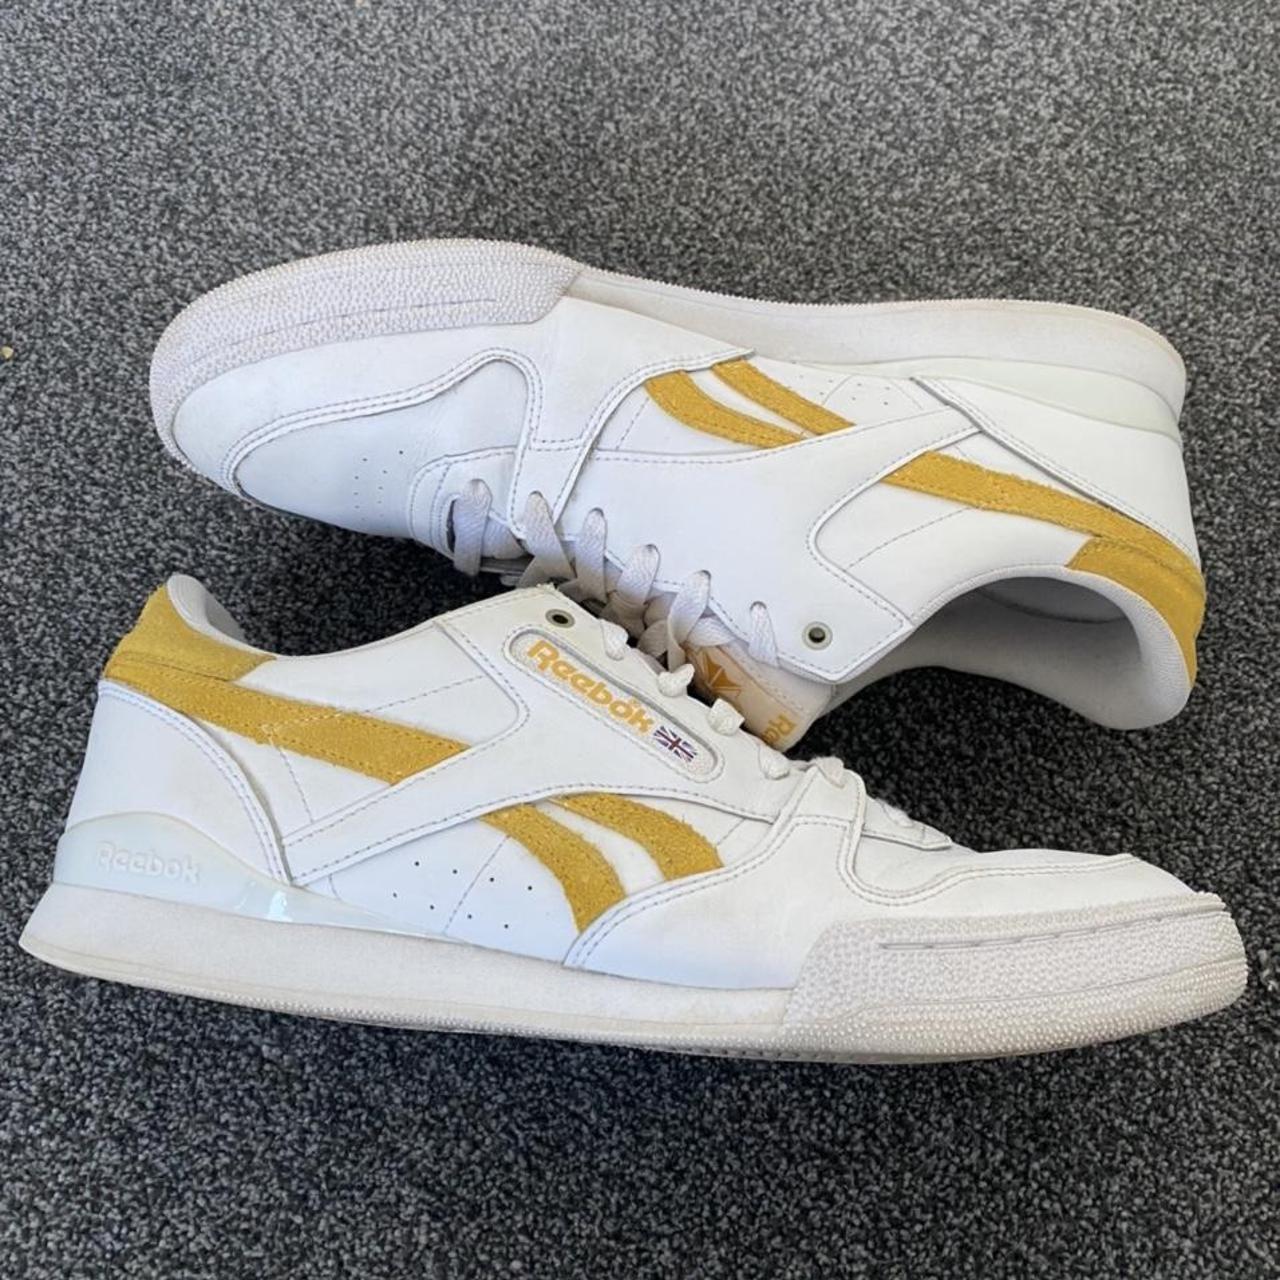 Reebok Classic Phase 1 MU X Montana Cans Colab in... - Depop